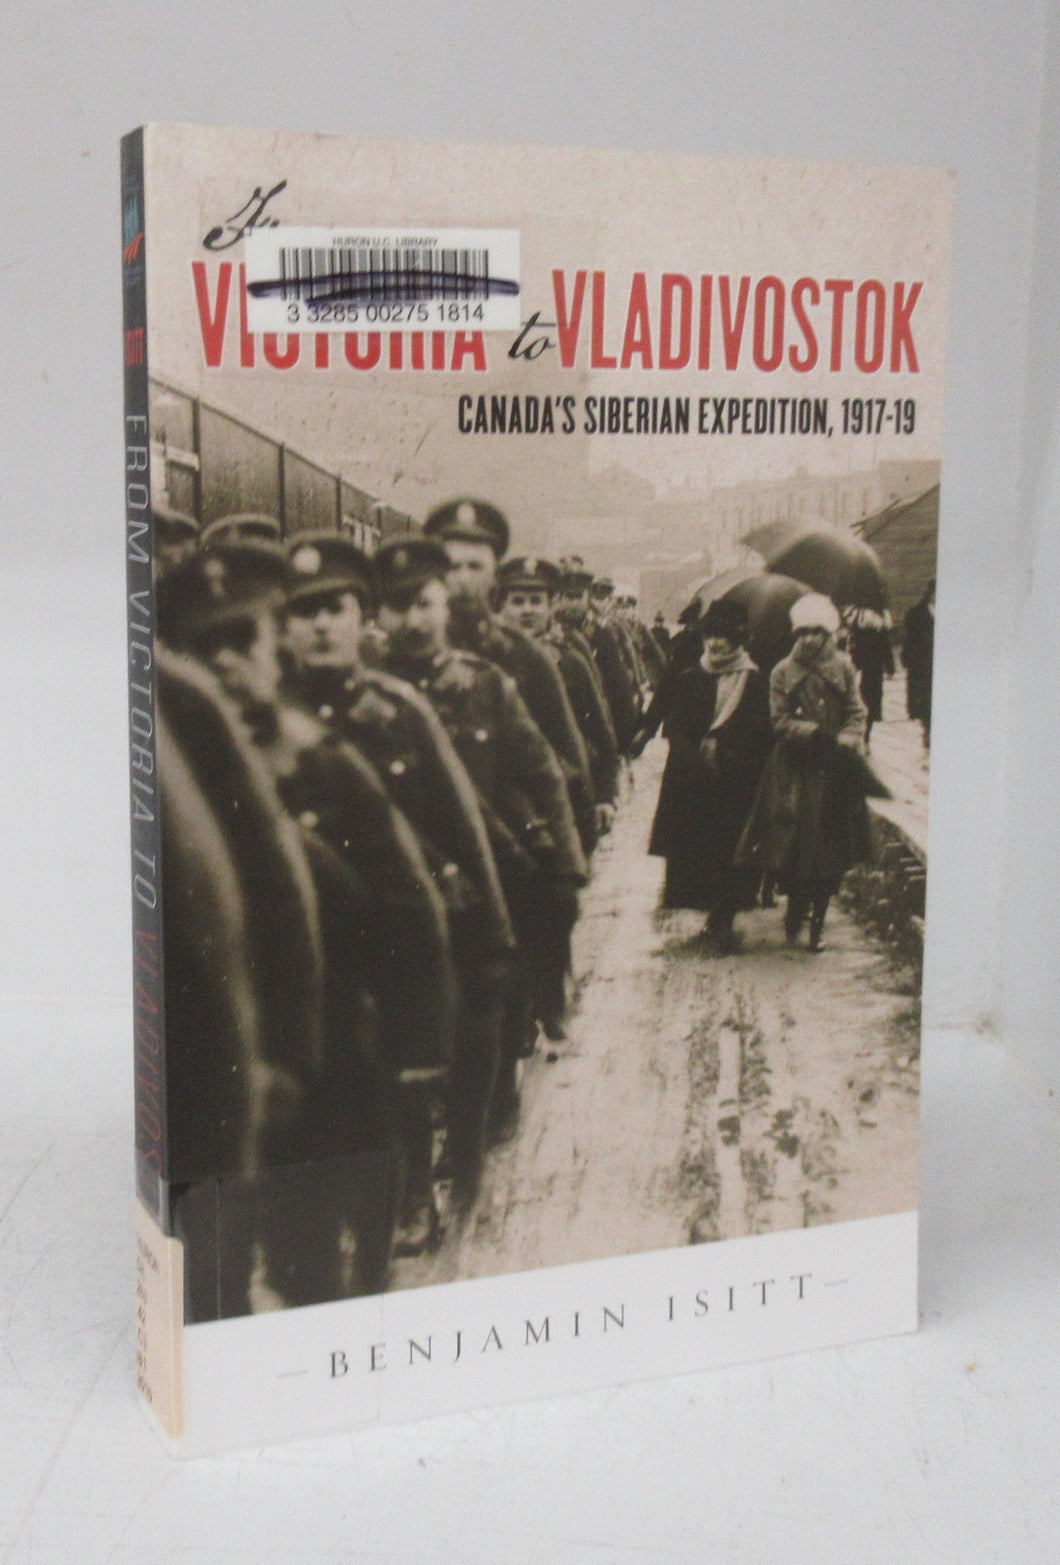 From Victoria to Vladivostok: Canada's Siberian Expedition, 1917-19